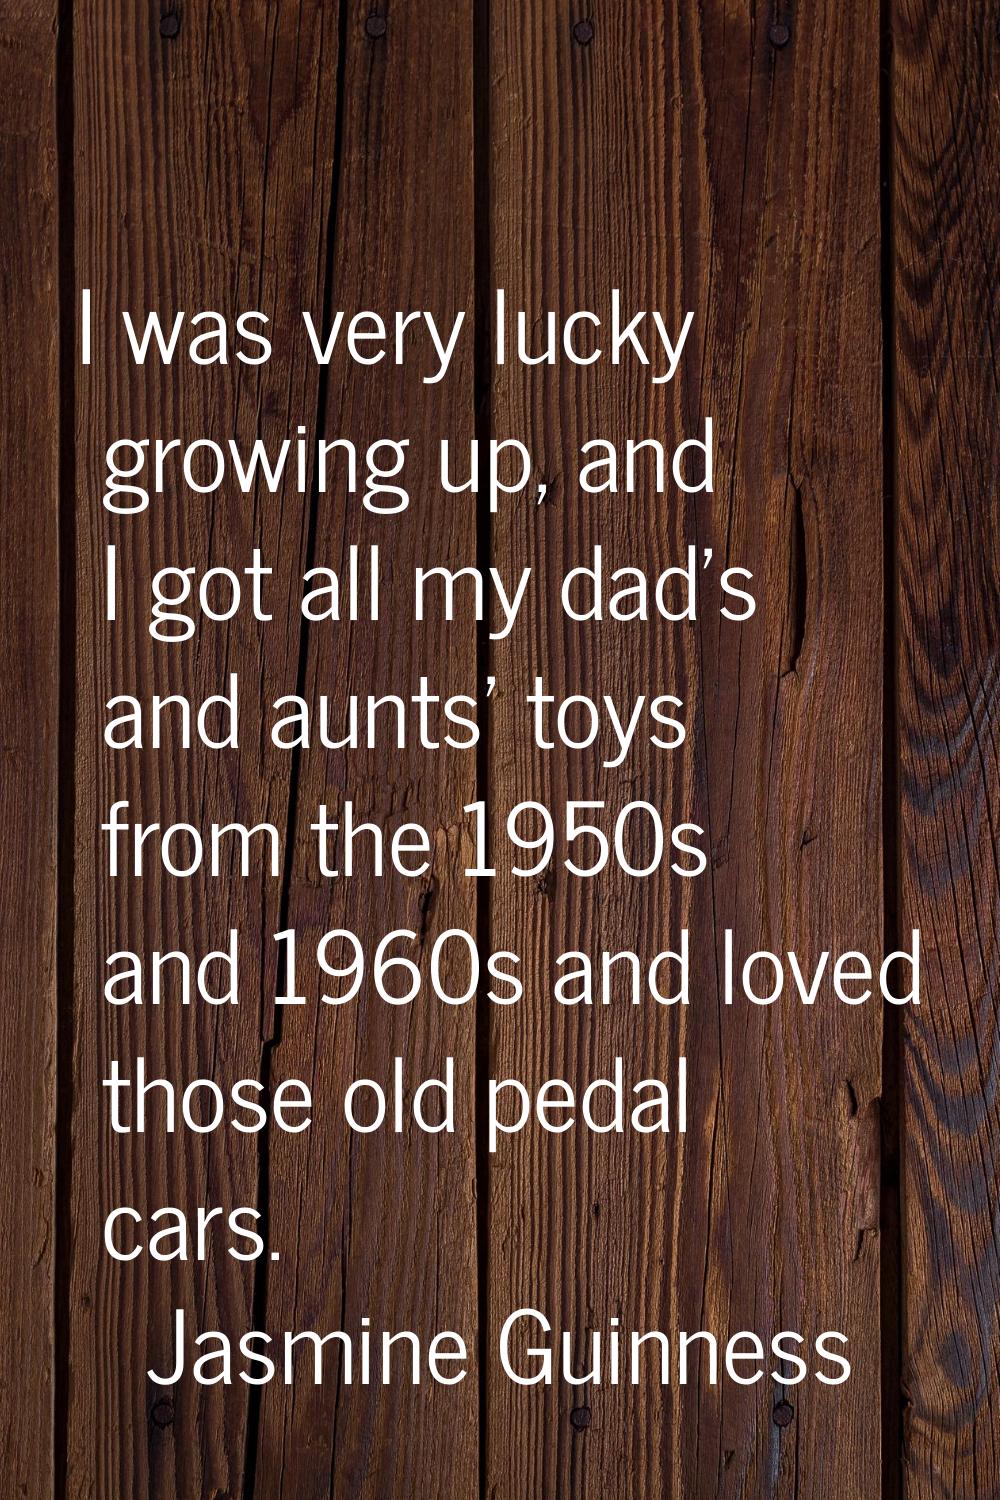 I was very lucky growing up, and I got all my dad's and aunts' toys from the 1950s and 1960s and lo